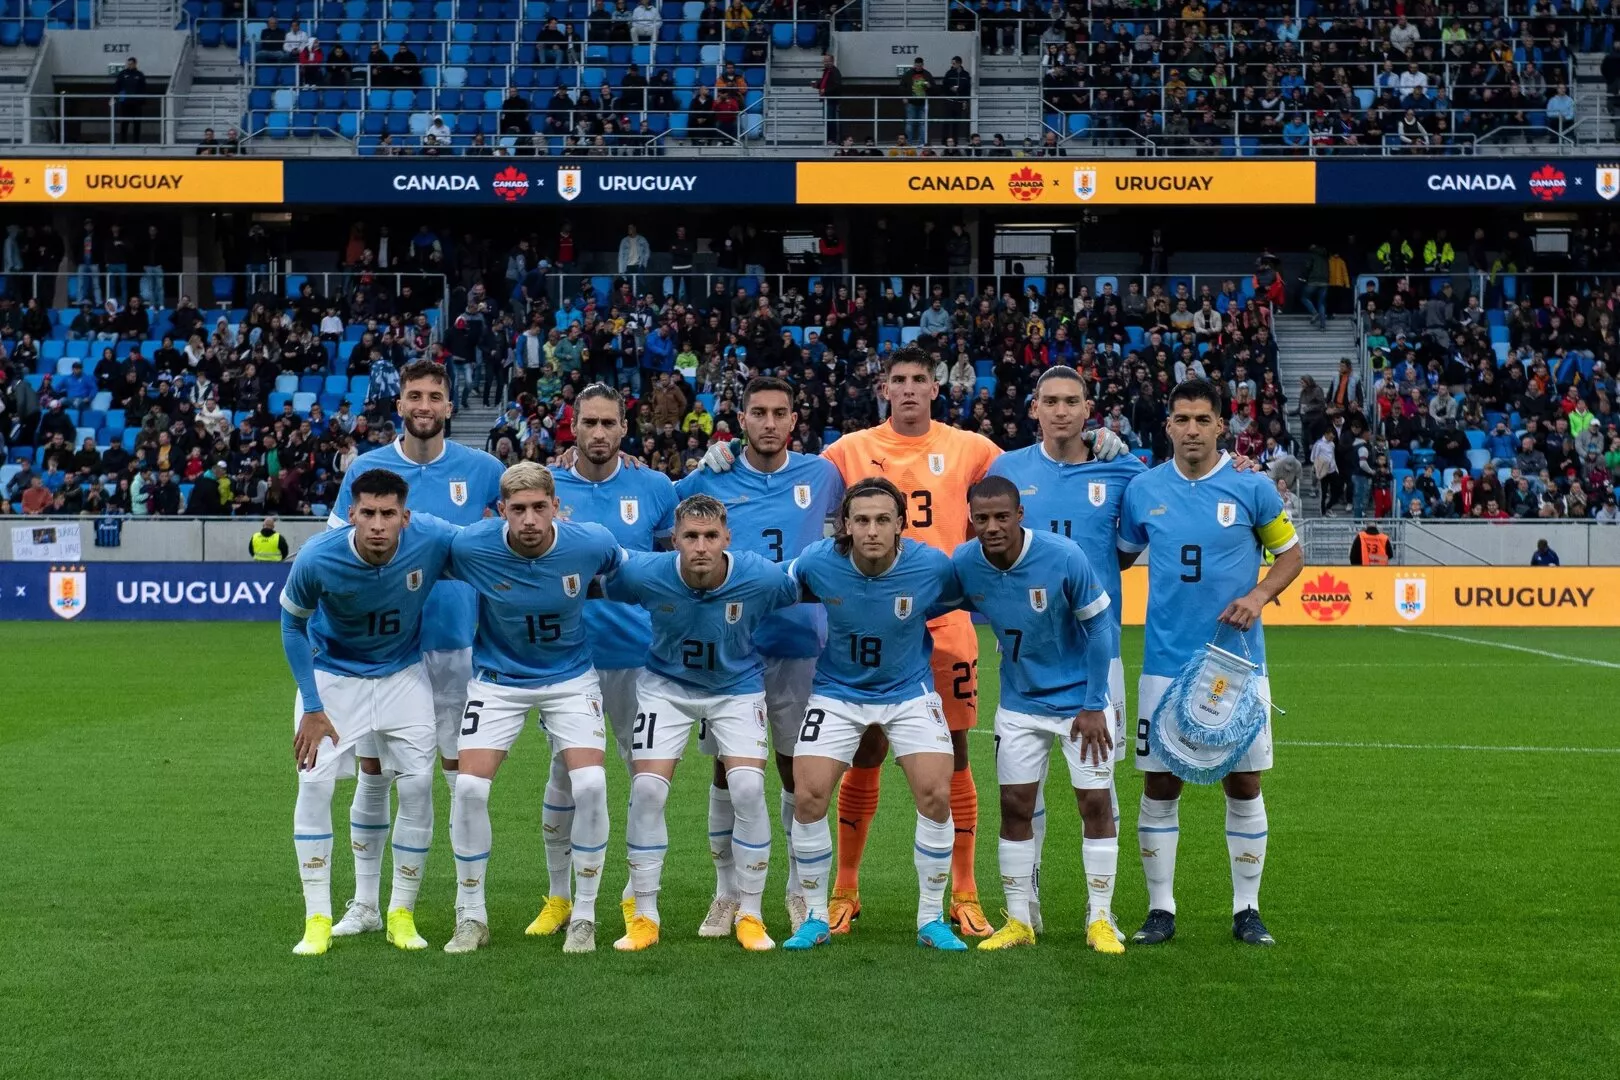 Uruguay World Cup squad 2022: All 26 players for national team in Qatar